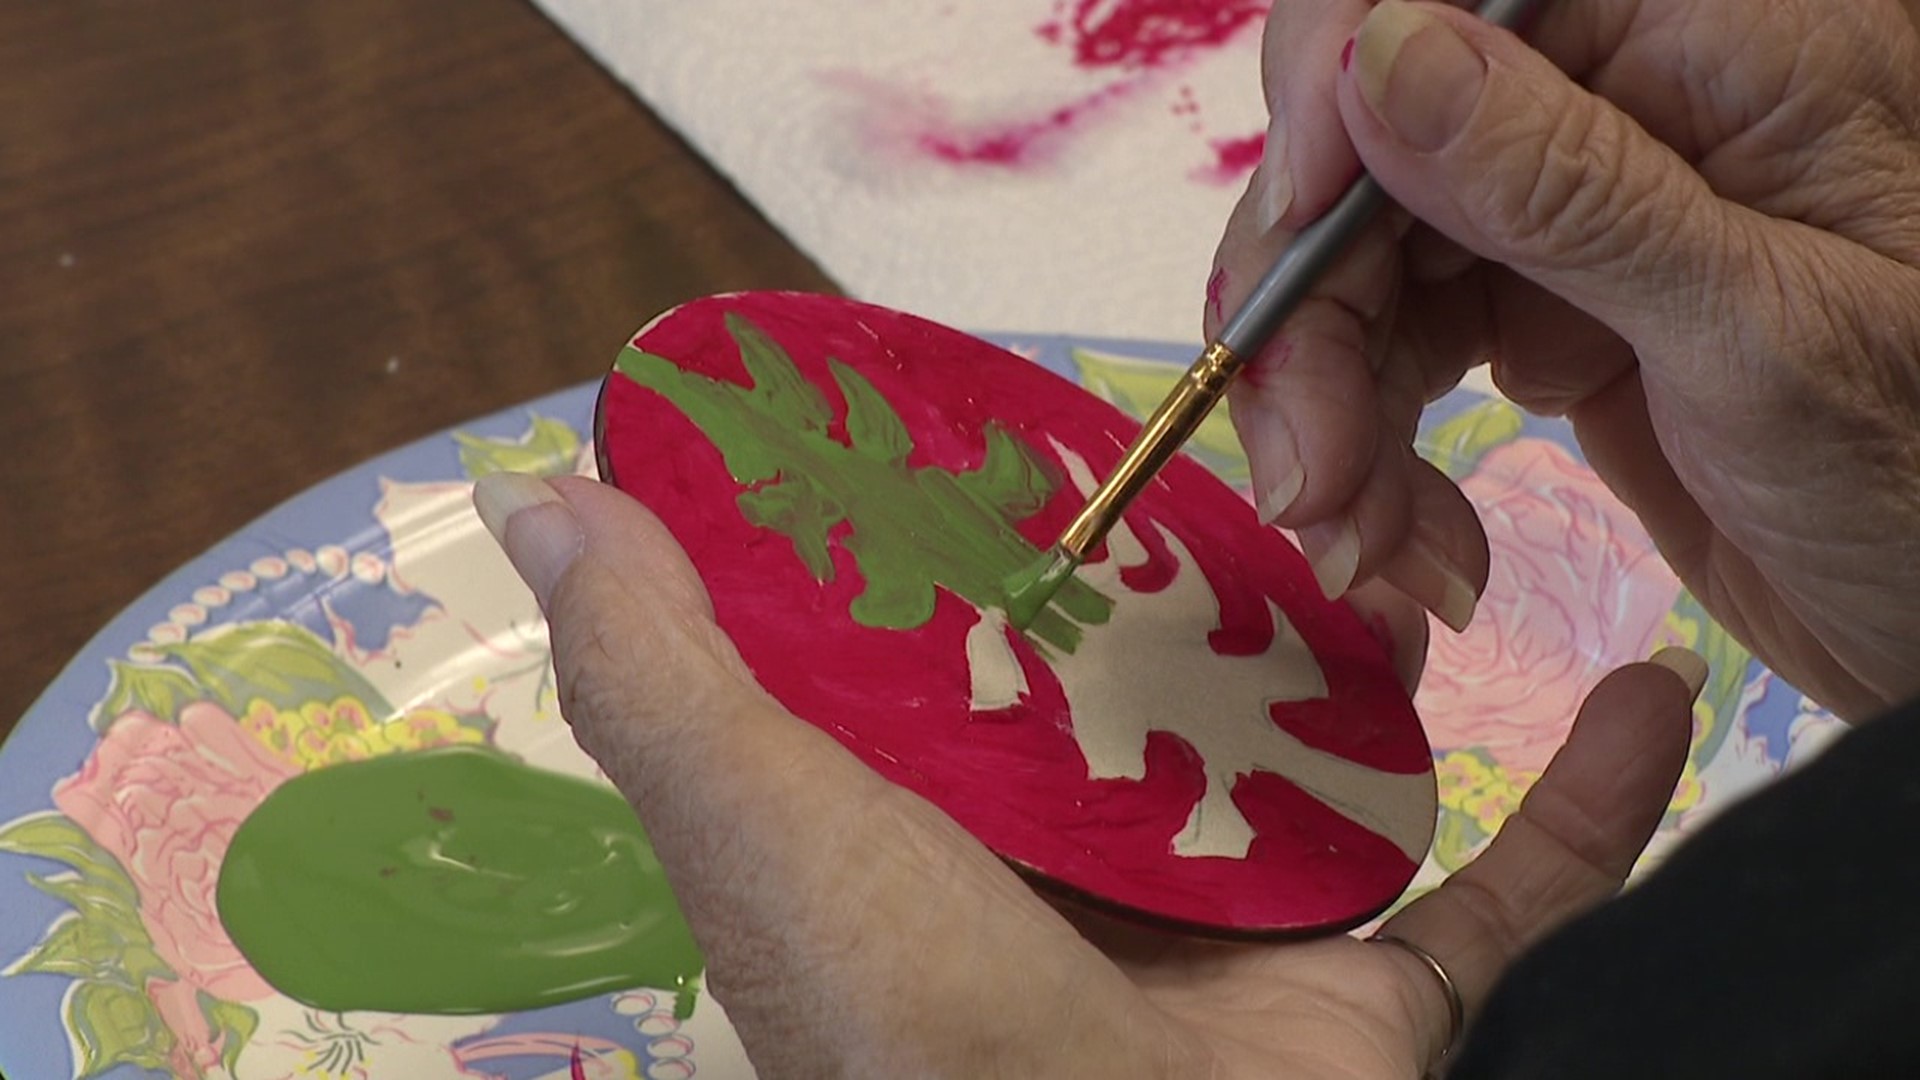 Seniors were in the holiday spirit, decorating ornaments. This was one of three events held in Lackawanna County. The ornaments will be on display in Harrisburg.